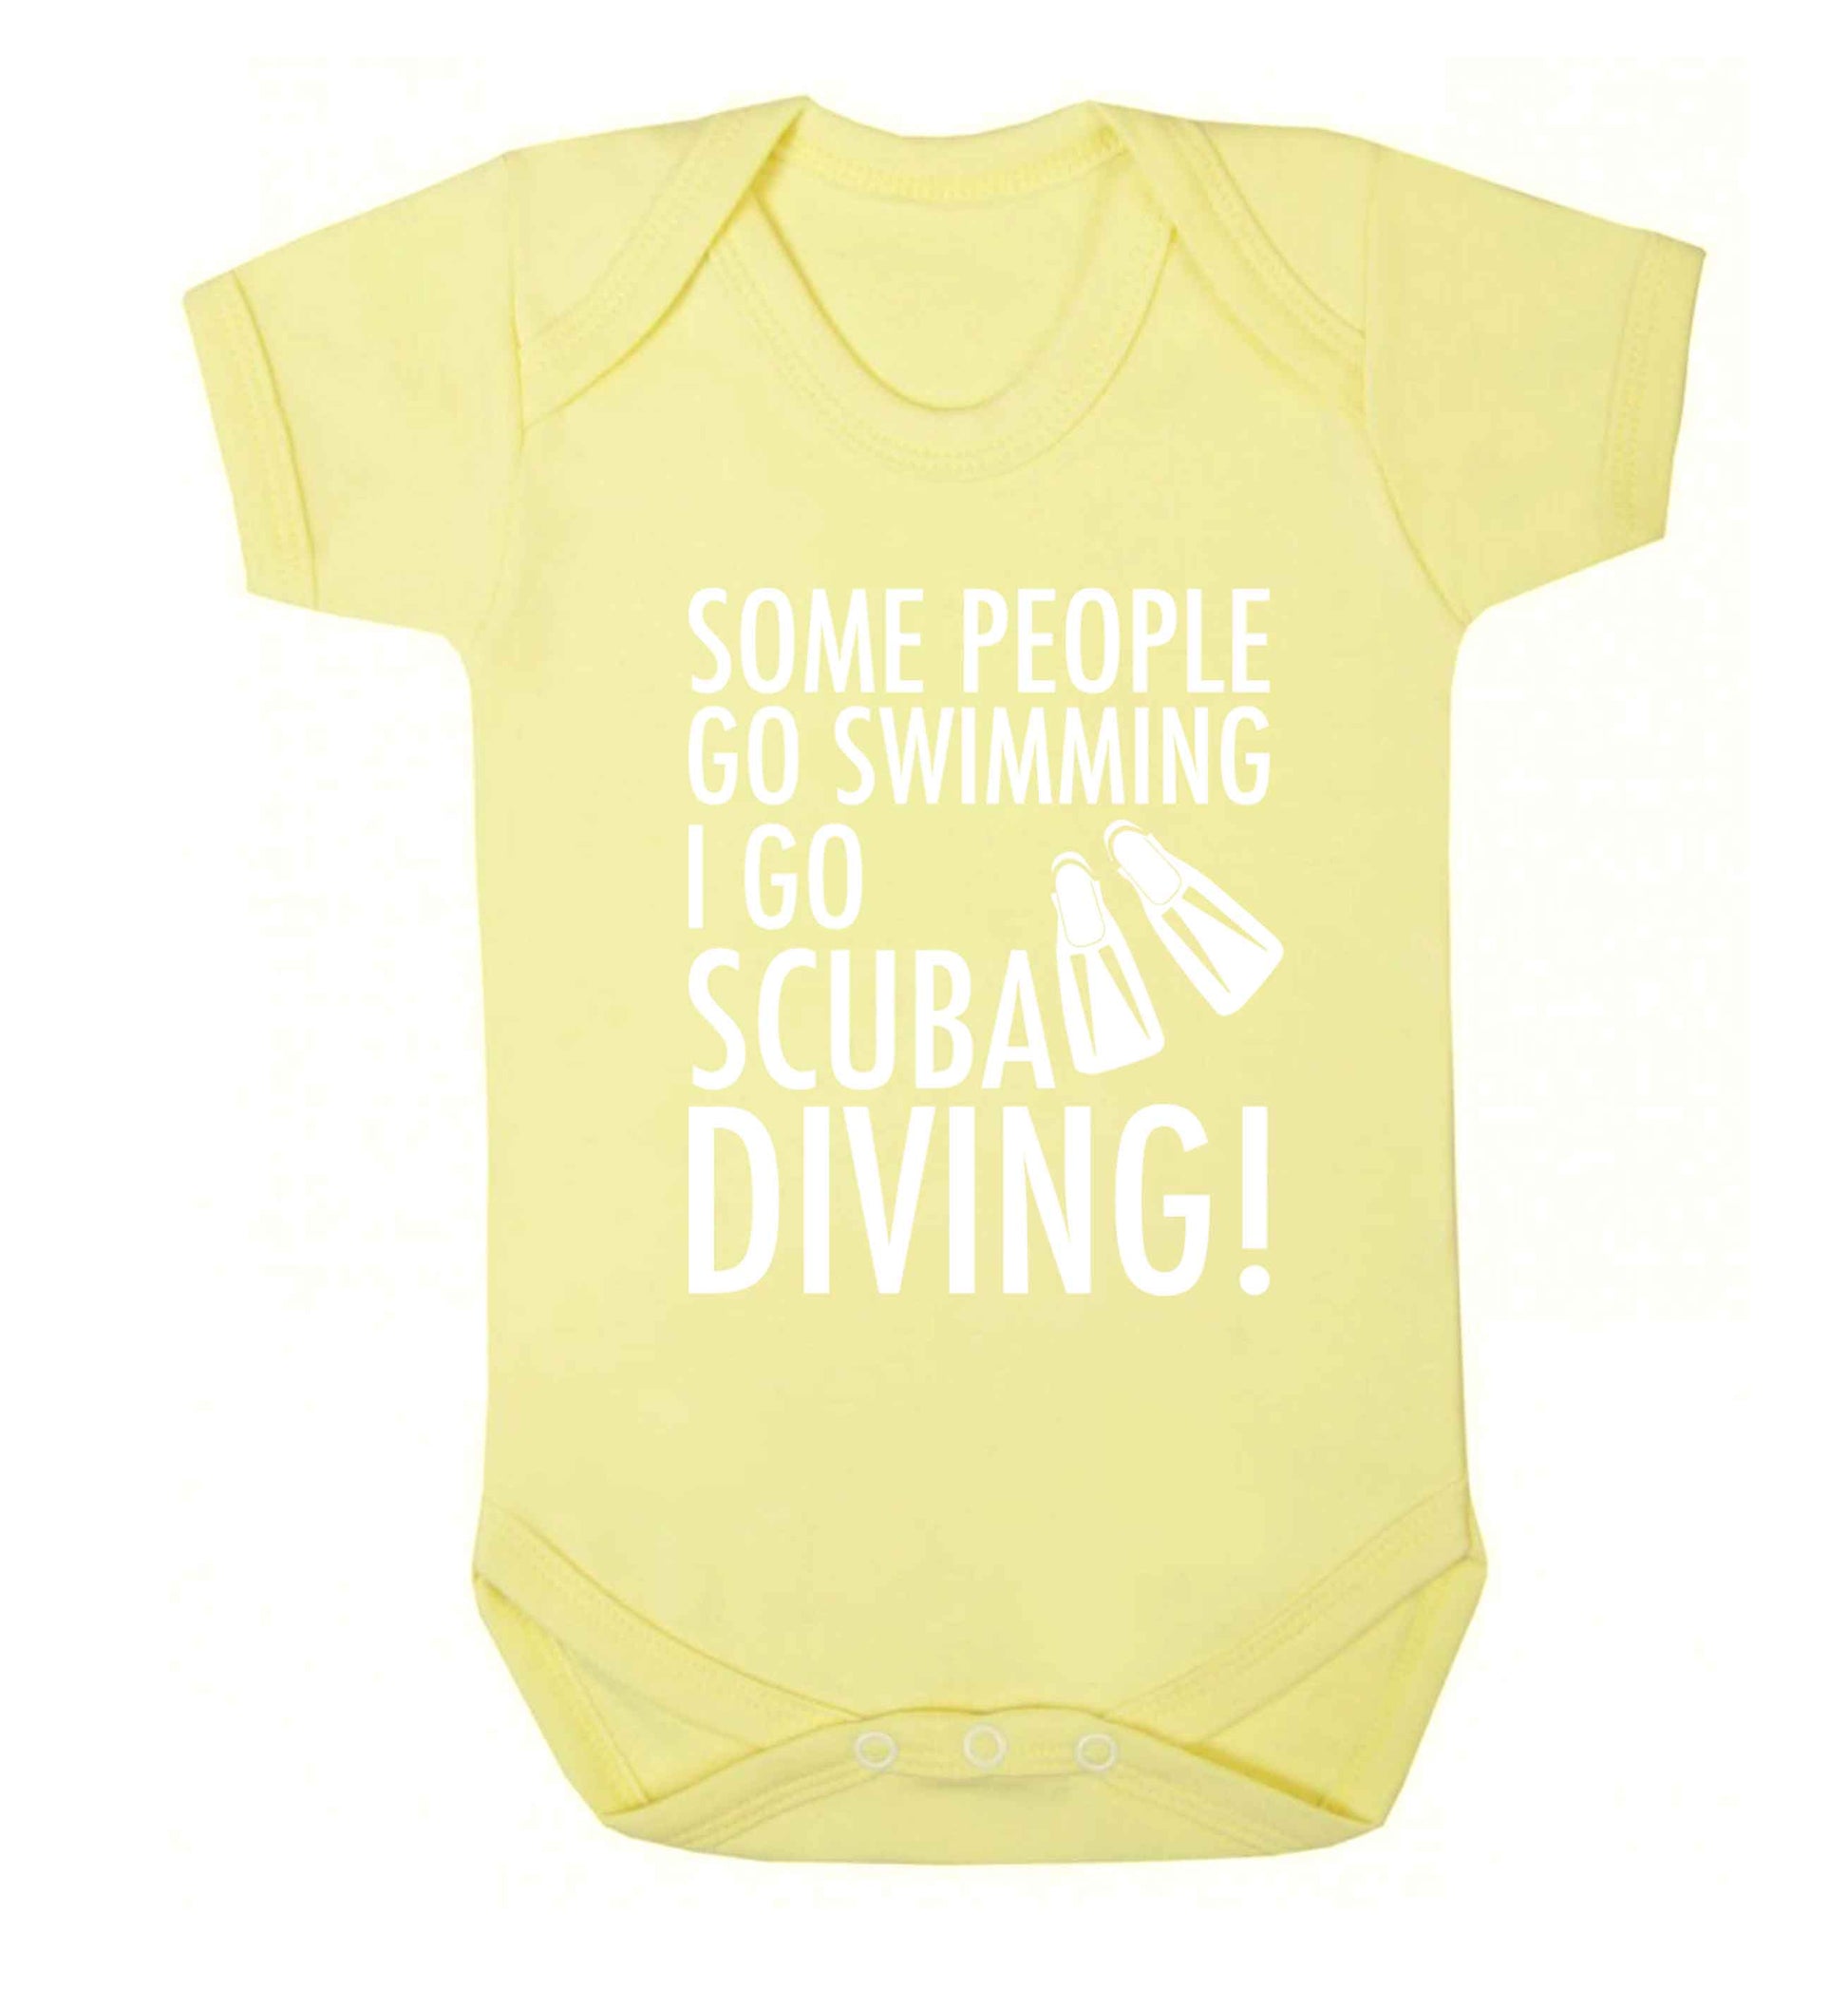 Some people go swimming I go scuba diving! Baby Vest pale yellow 18-24 months